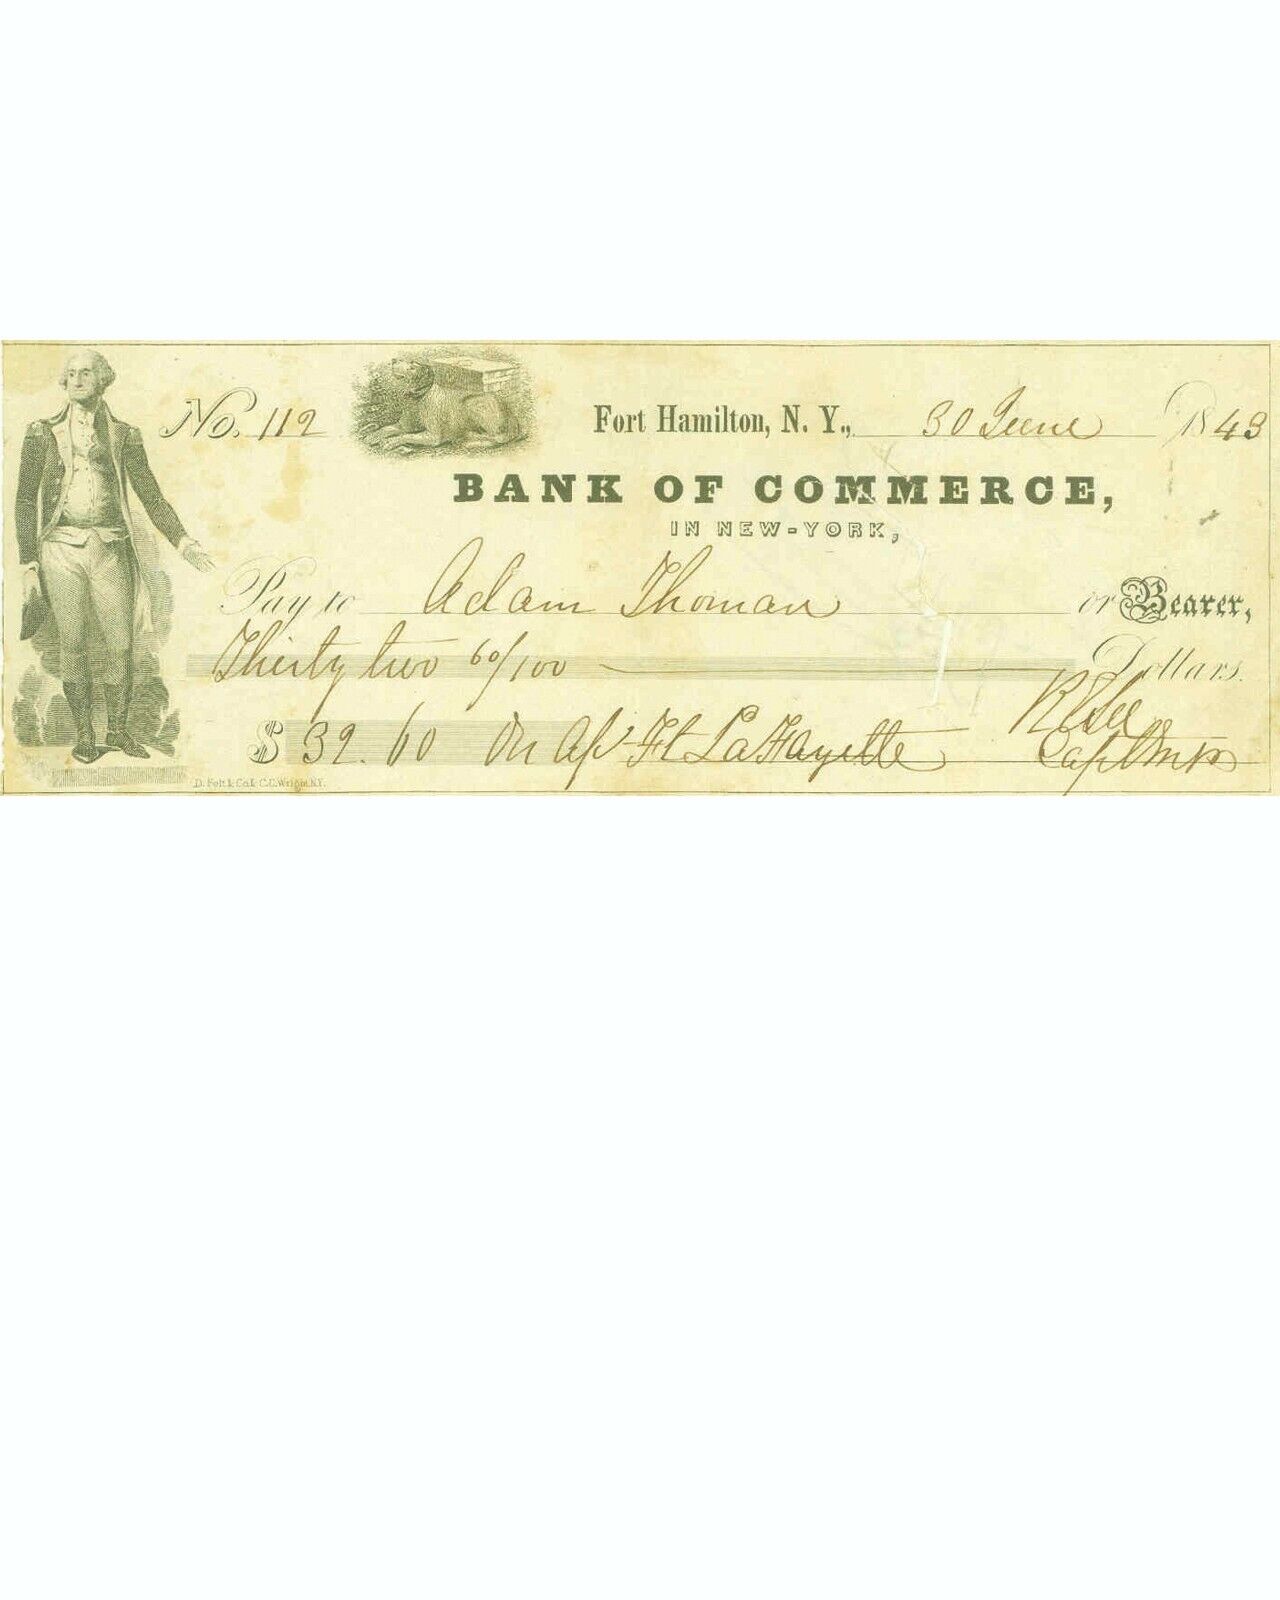 Robert E. Lee Reproduction Cancelled Check and 8 x 10 Photo 